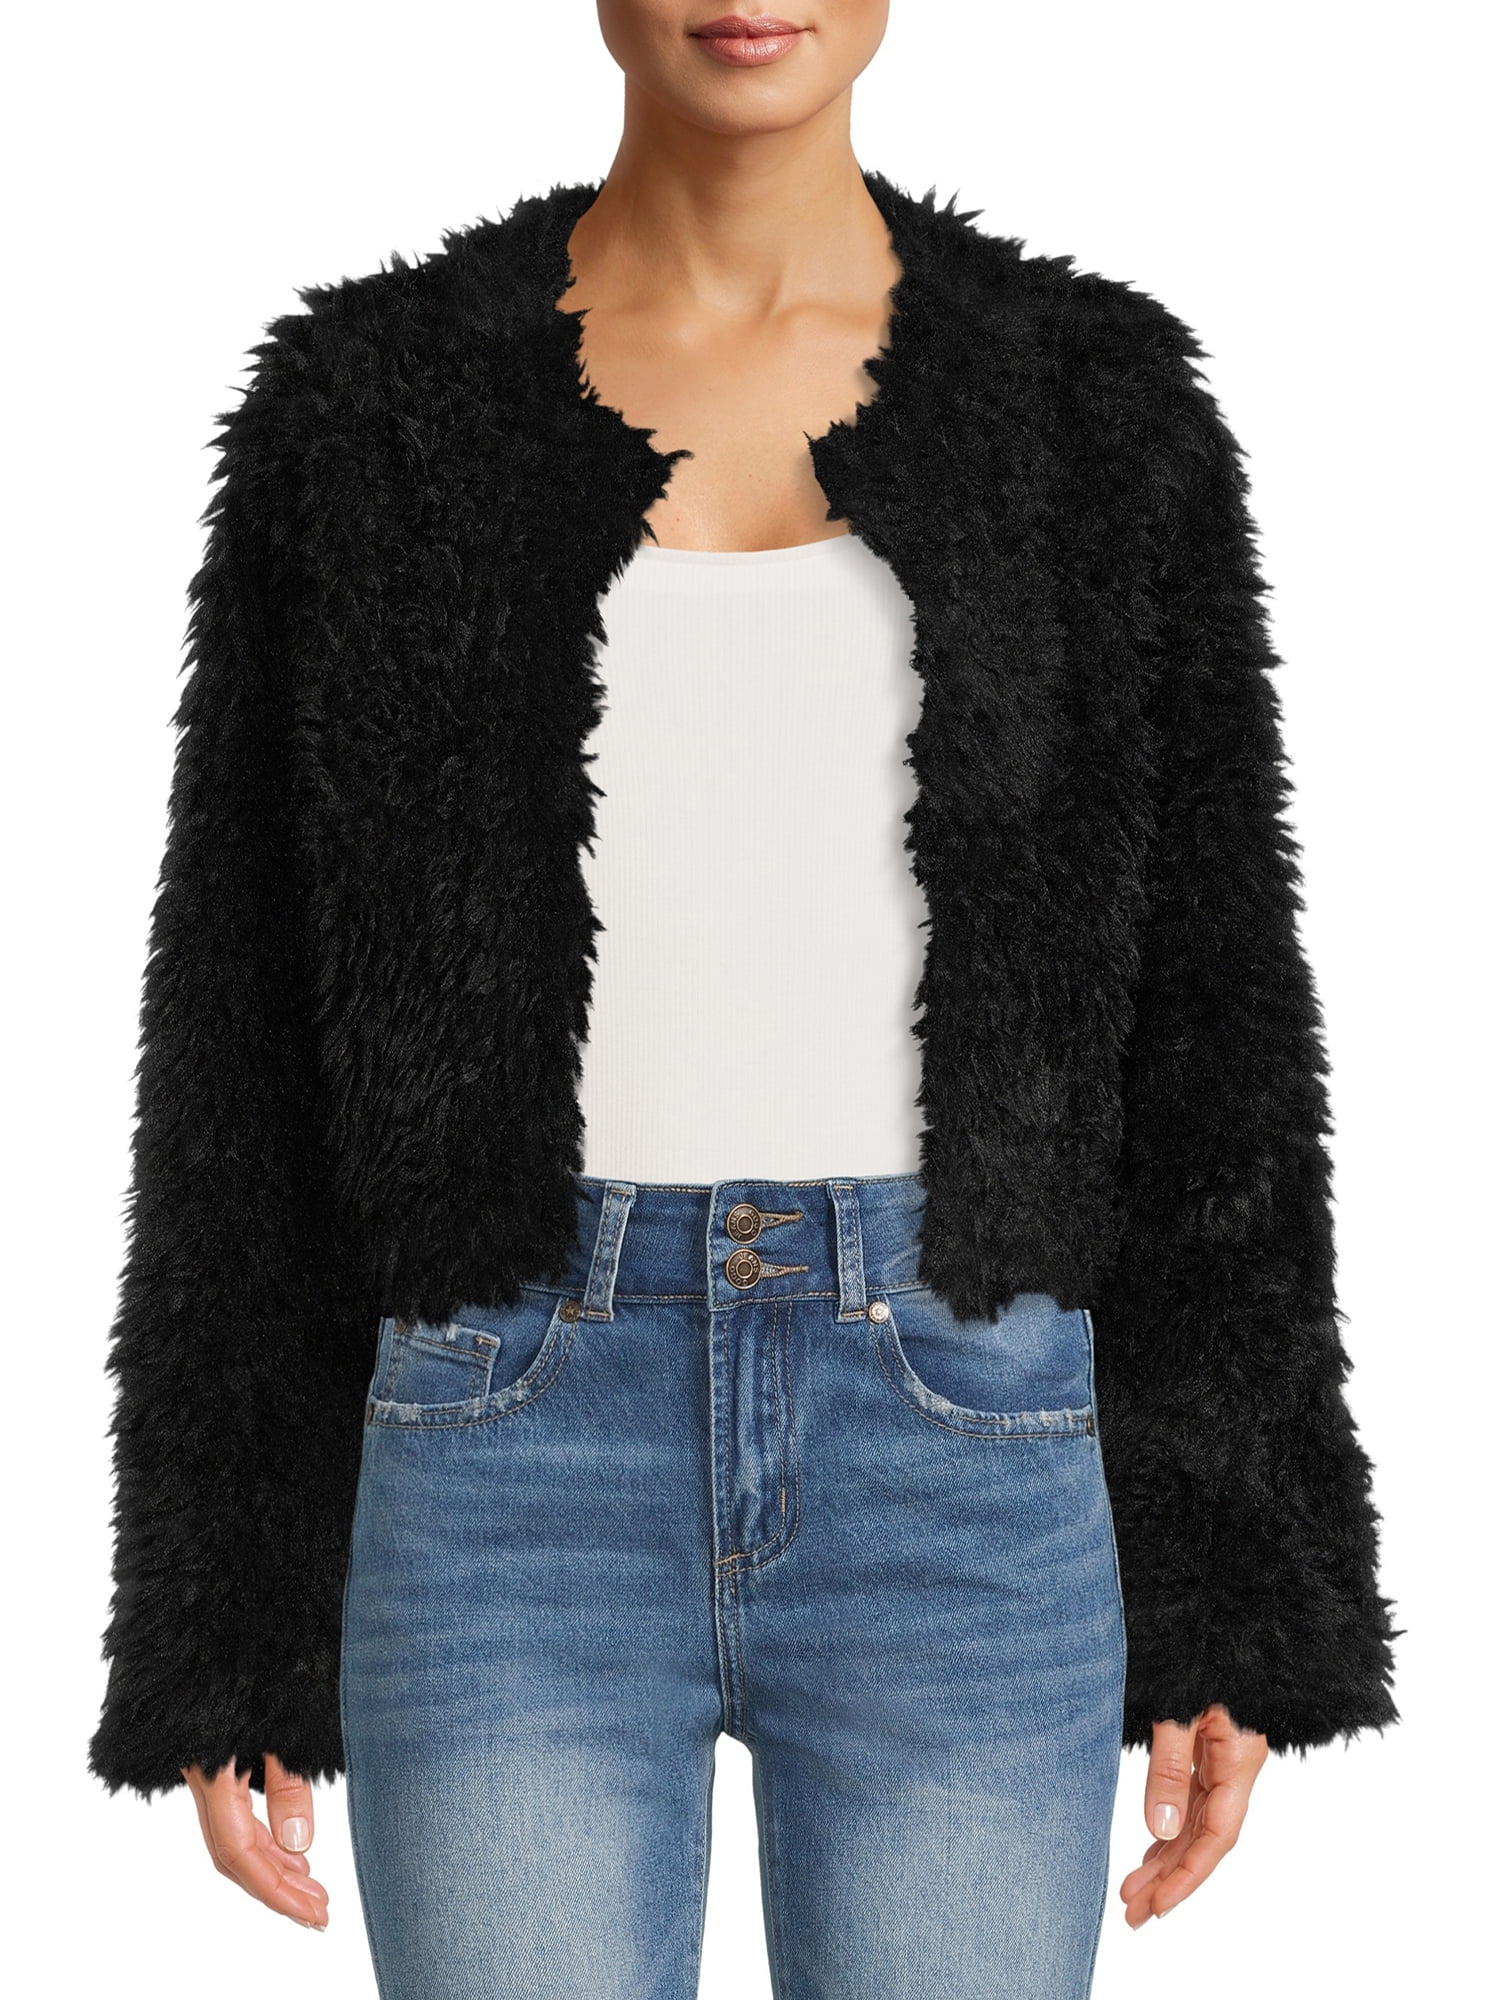 Madden NYC Junior's Cropped Faux Fur Jacket